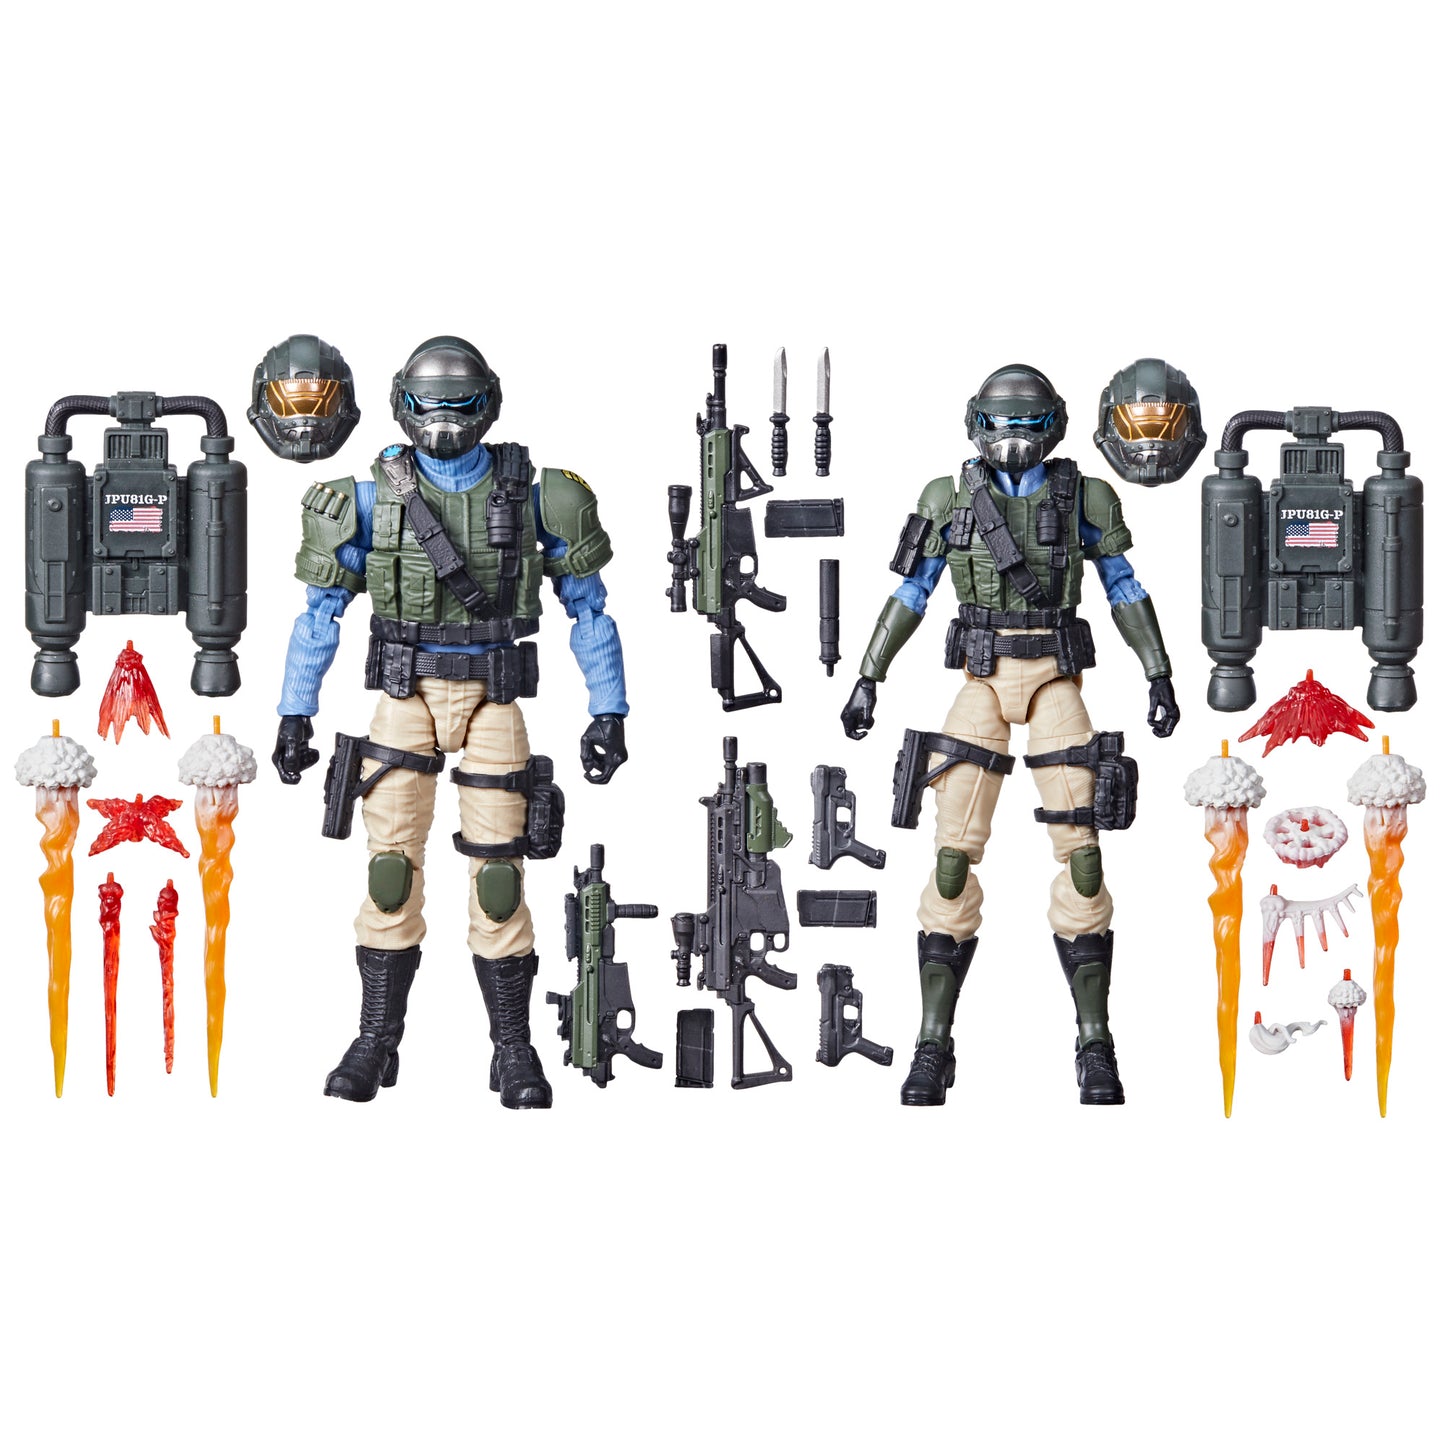 G.I. Joe Classified Series Steel Corps Troopers with accessories - heretoserveyou